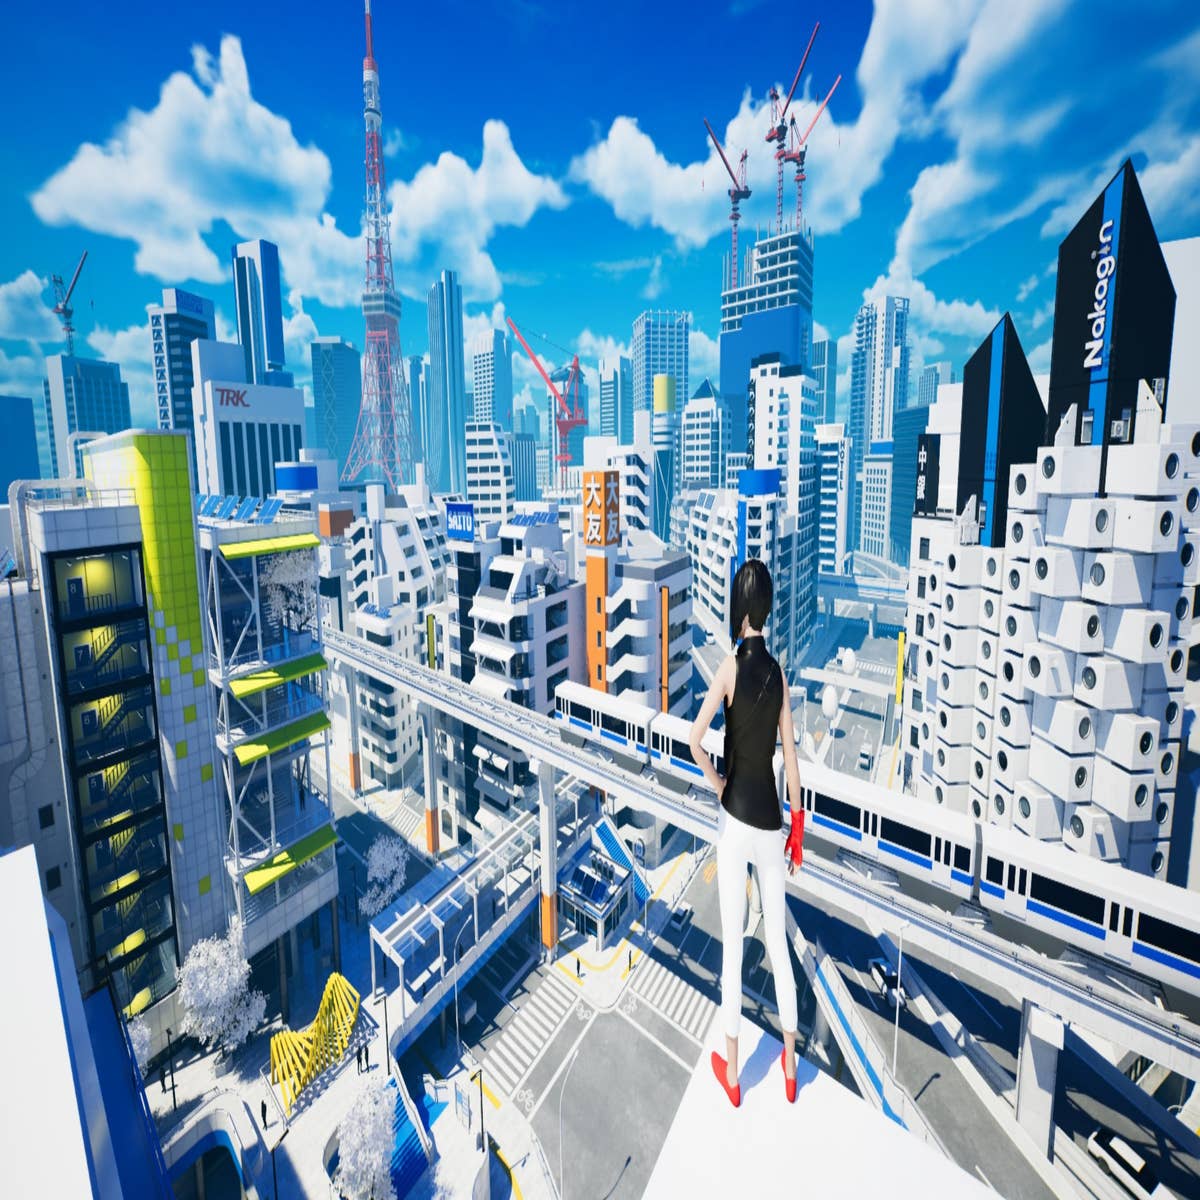 Mirror's Edge - Full Game Playthrough (No Commentary) 